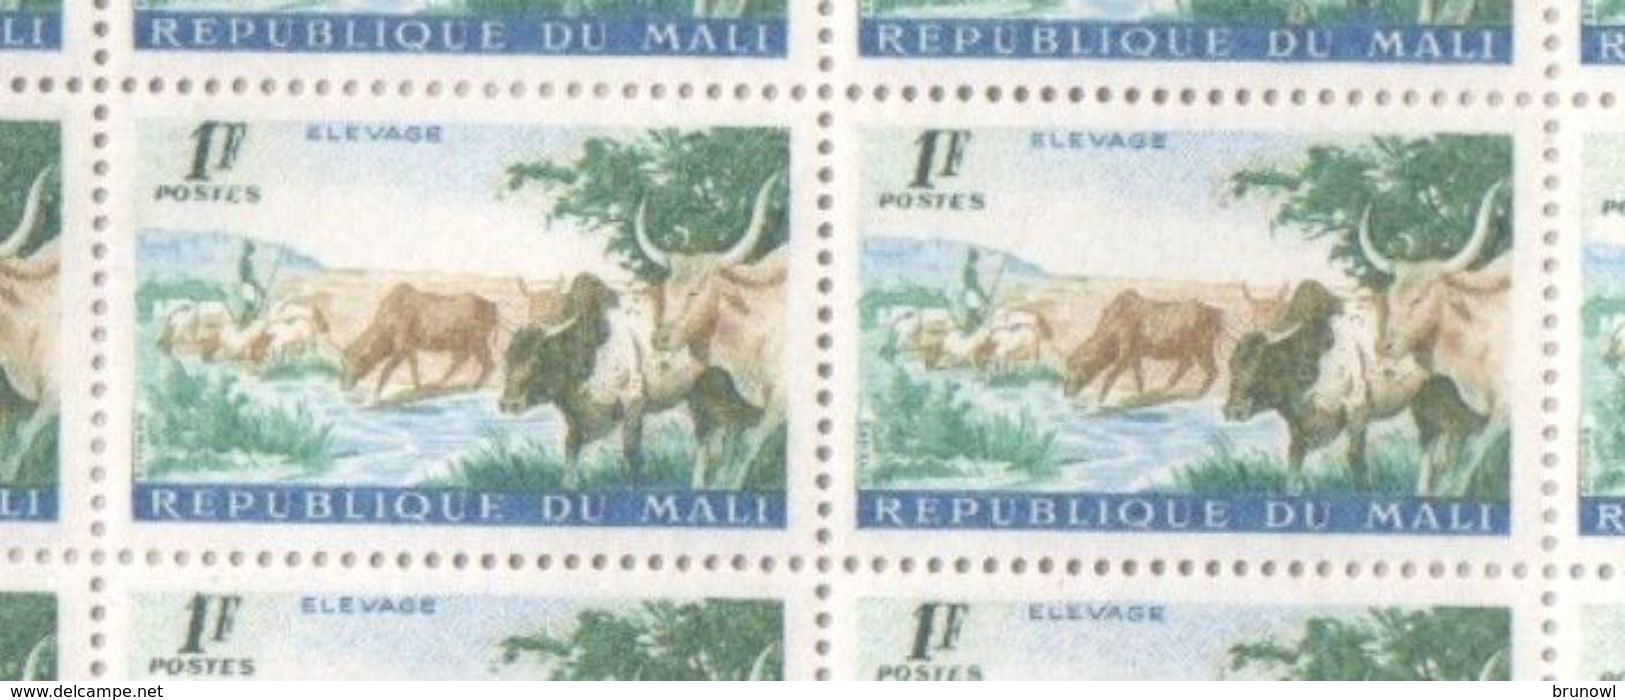 Mali MNH Sheet Of 1961 1F Agriculture Series Stamps - Mali (1959-...)